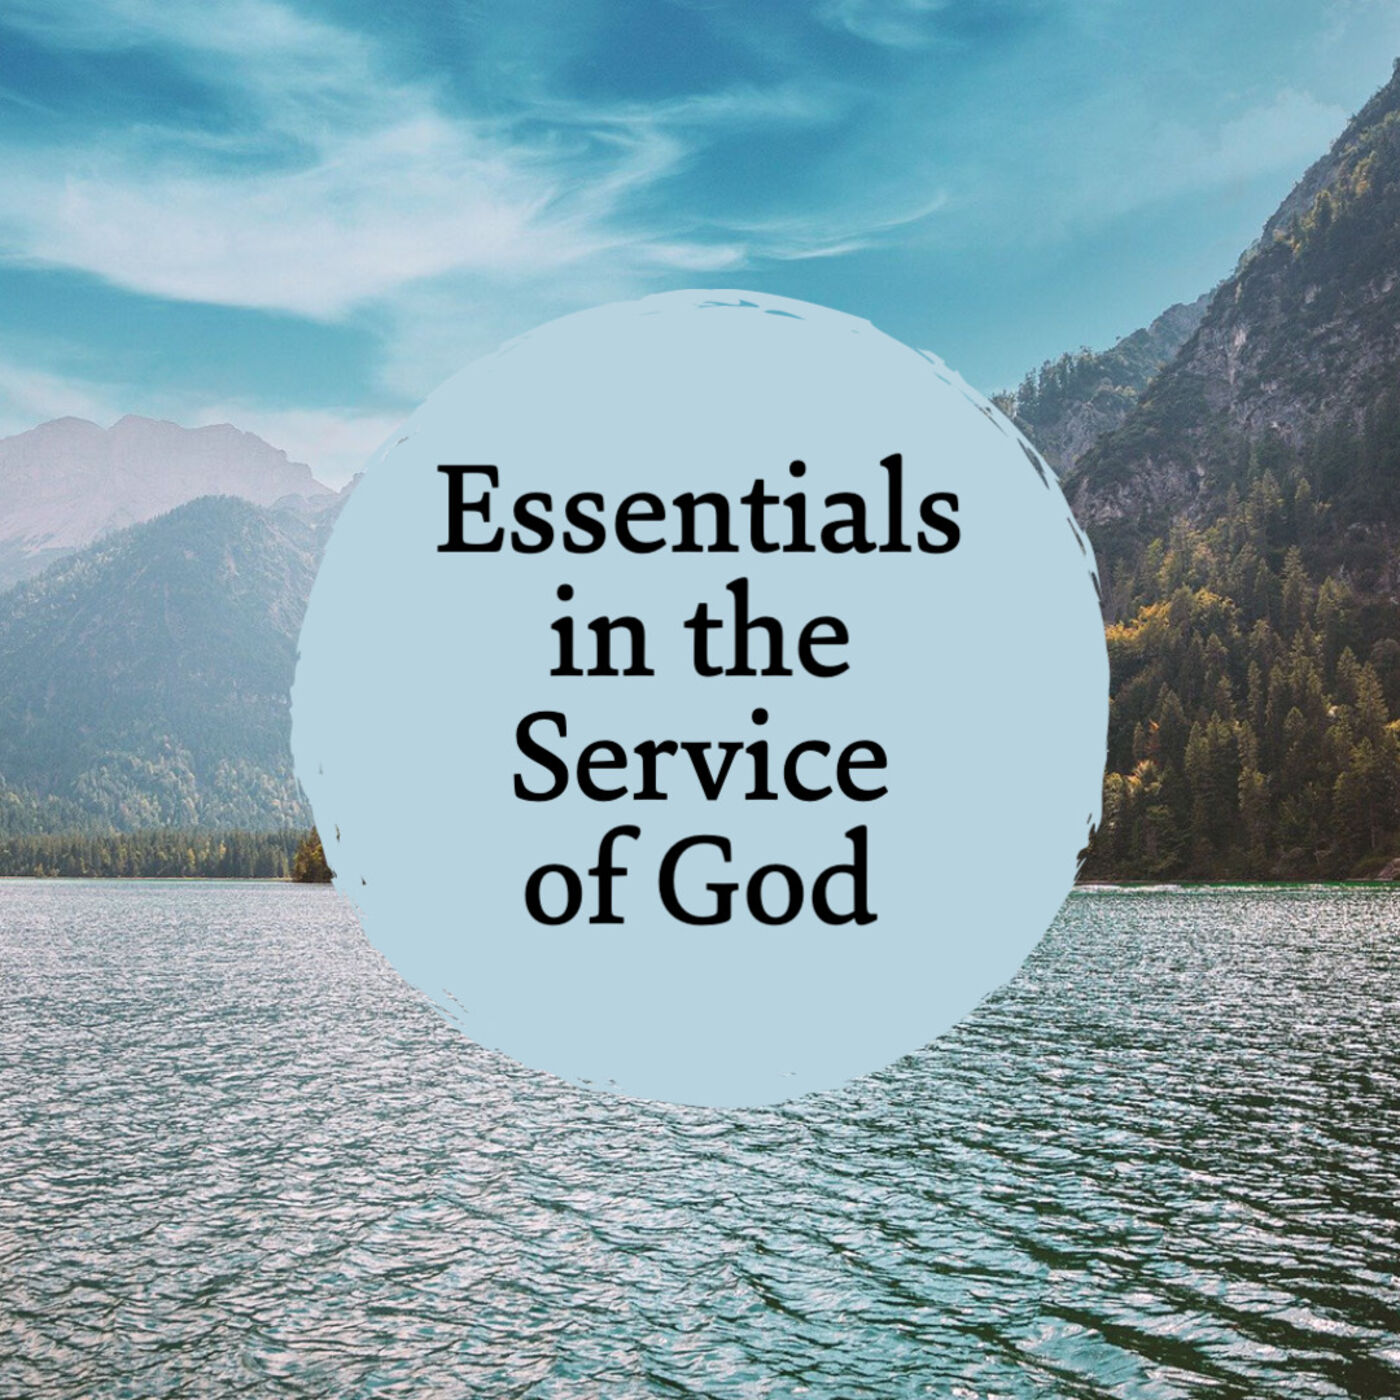 Essentials in the Service of God